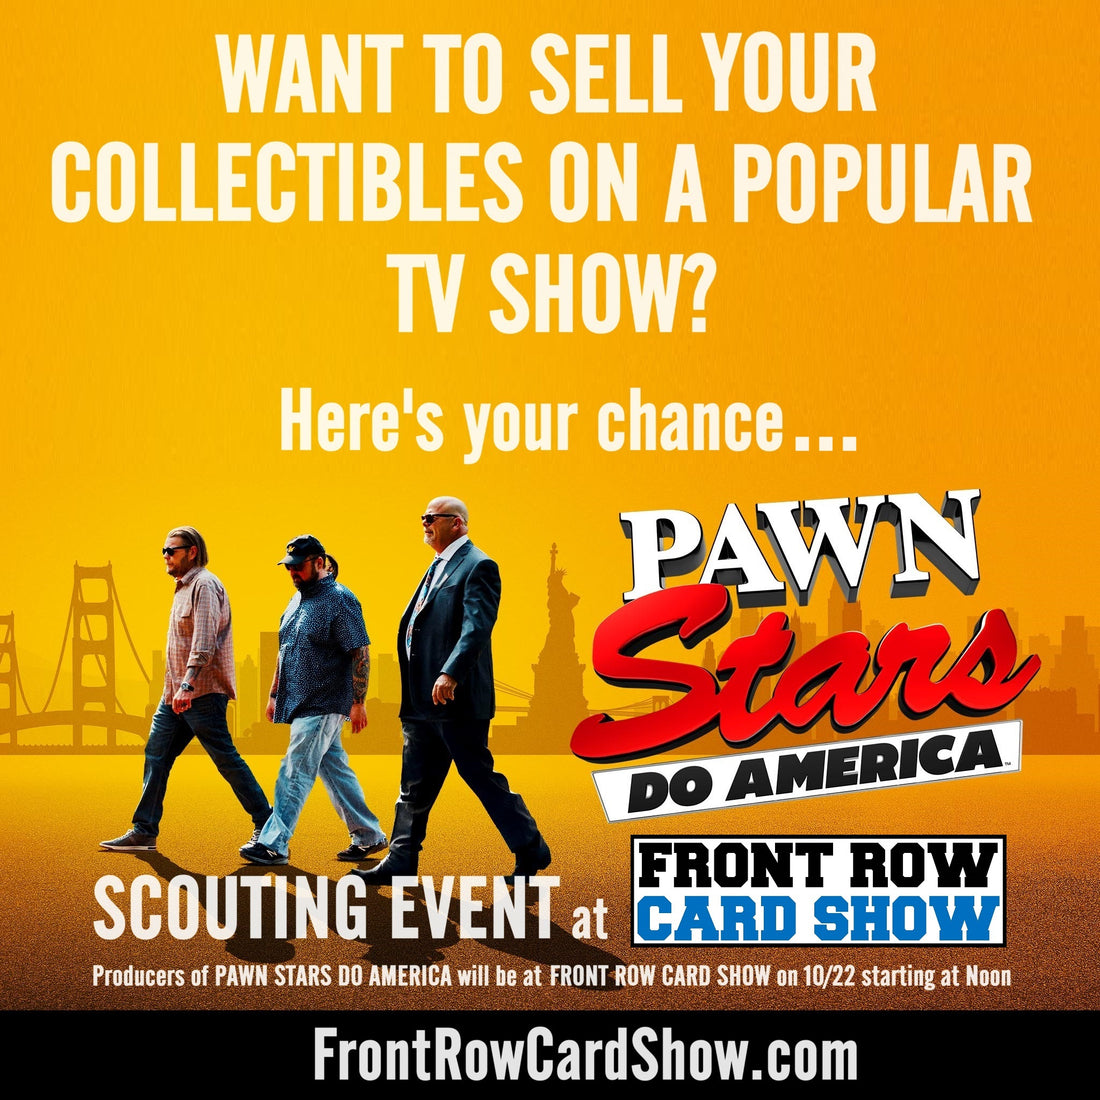 Want to be on PAWN STARS DO AMERICA?